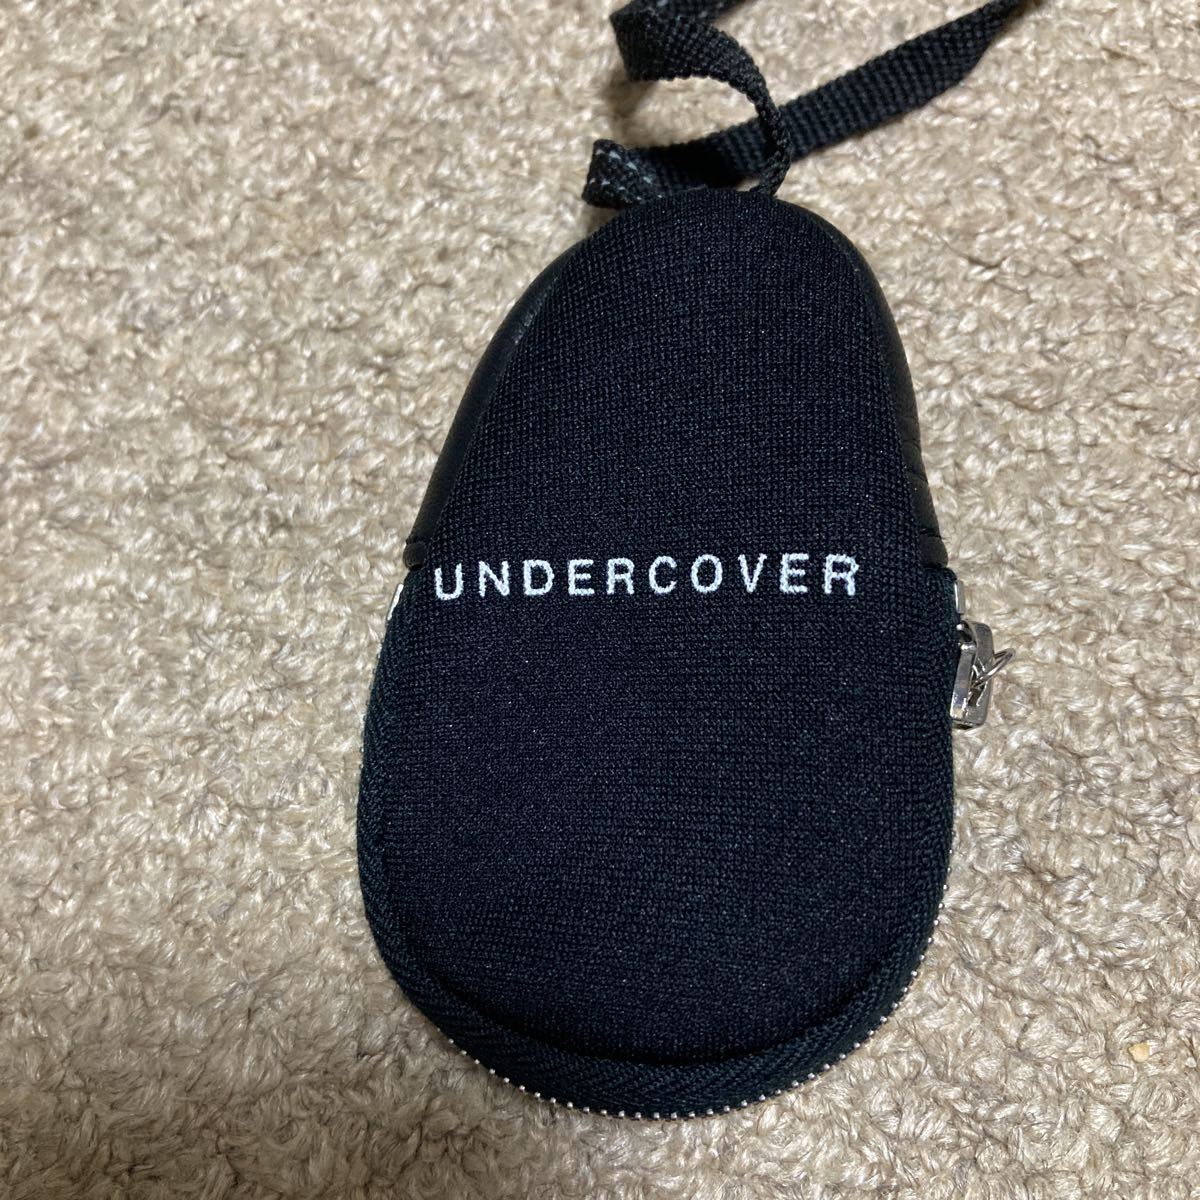  undercover key chain necklace black unused goods height ..